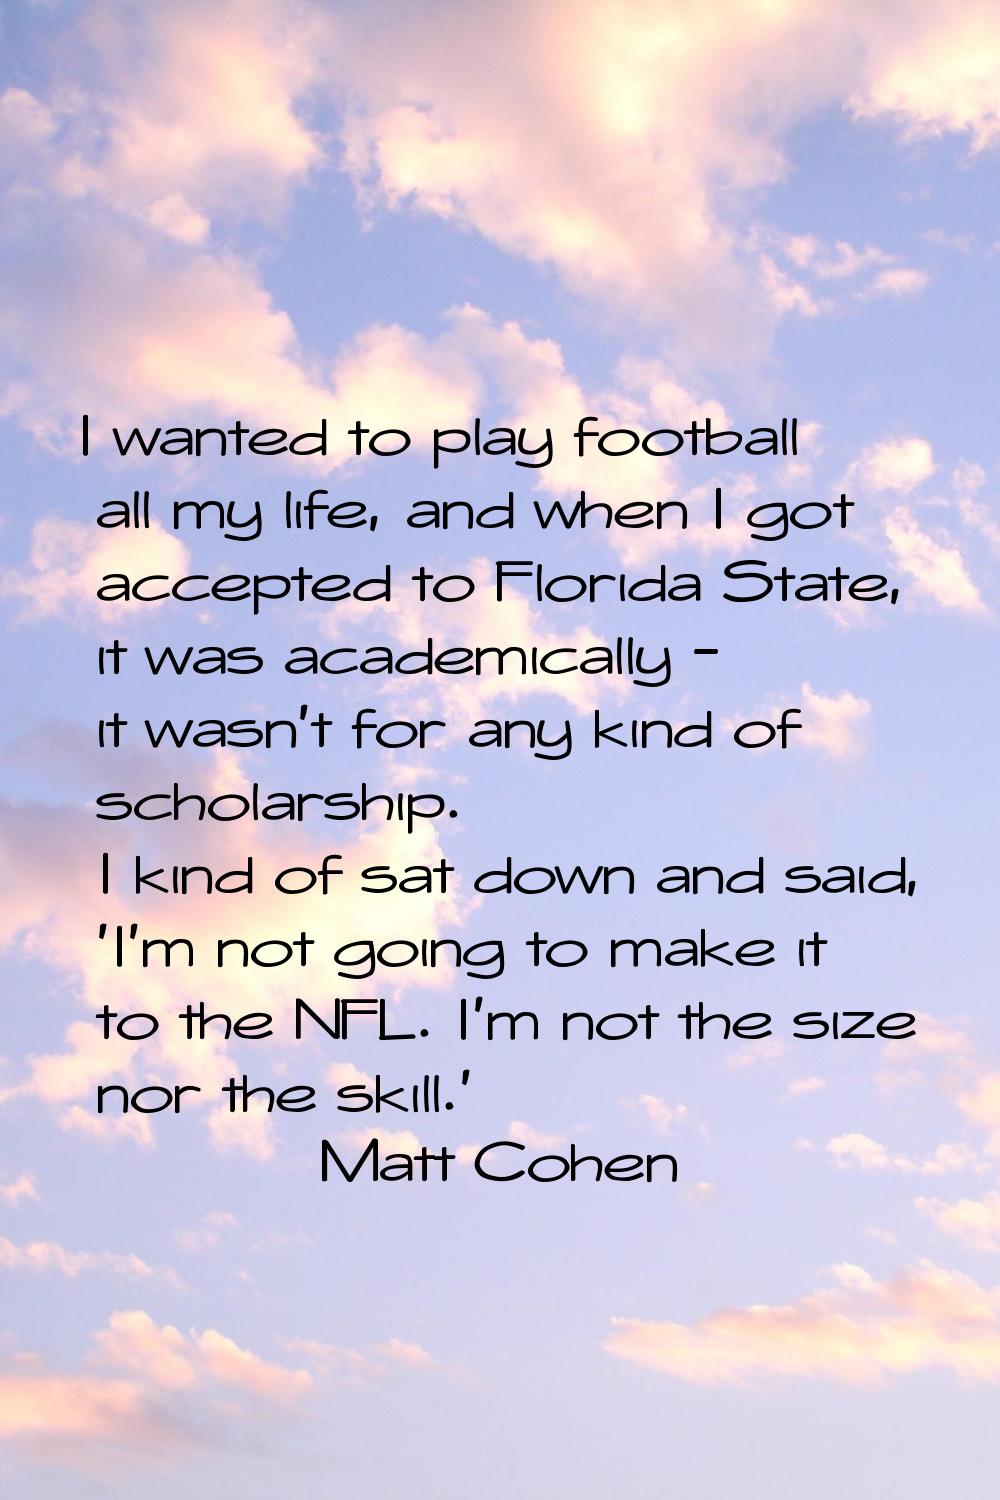 I wanted to play football all my life, and when I got accepted to Florida State, it was academicall